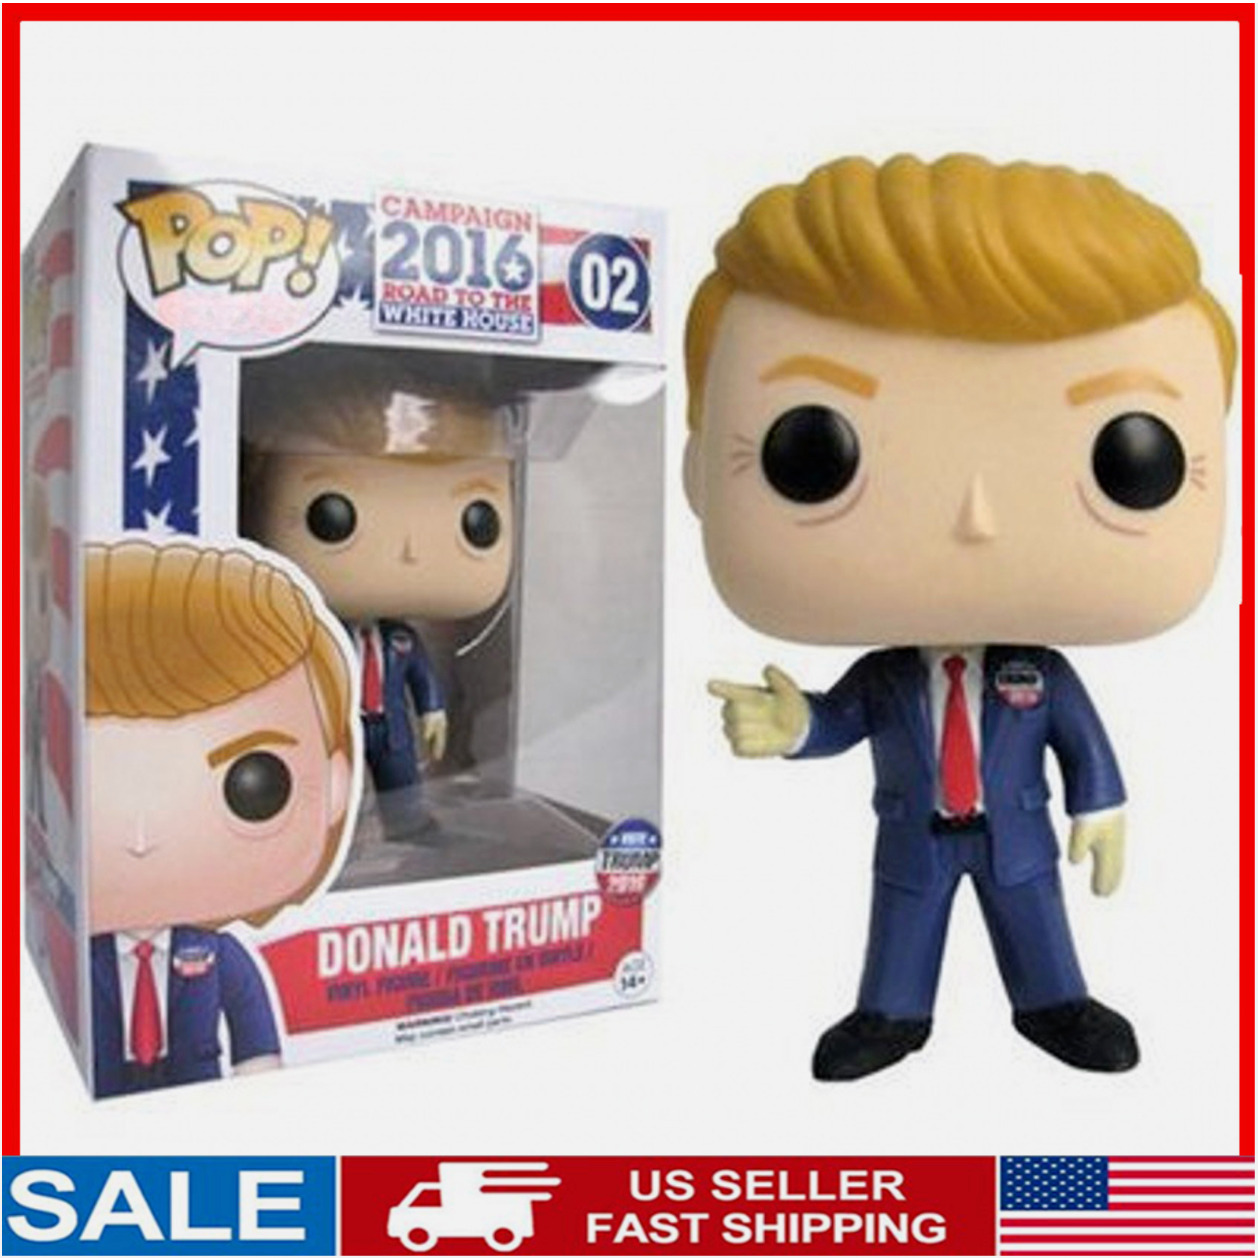 Donald Trump #02 - Funko Pop The Vote 2016 Road to the White House Gifts, 10CM